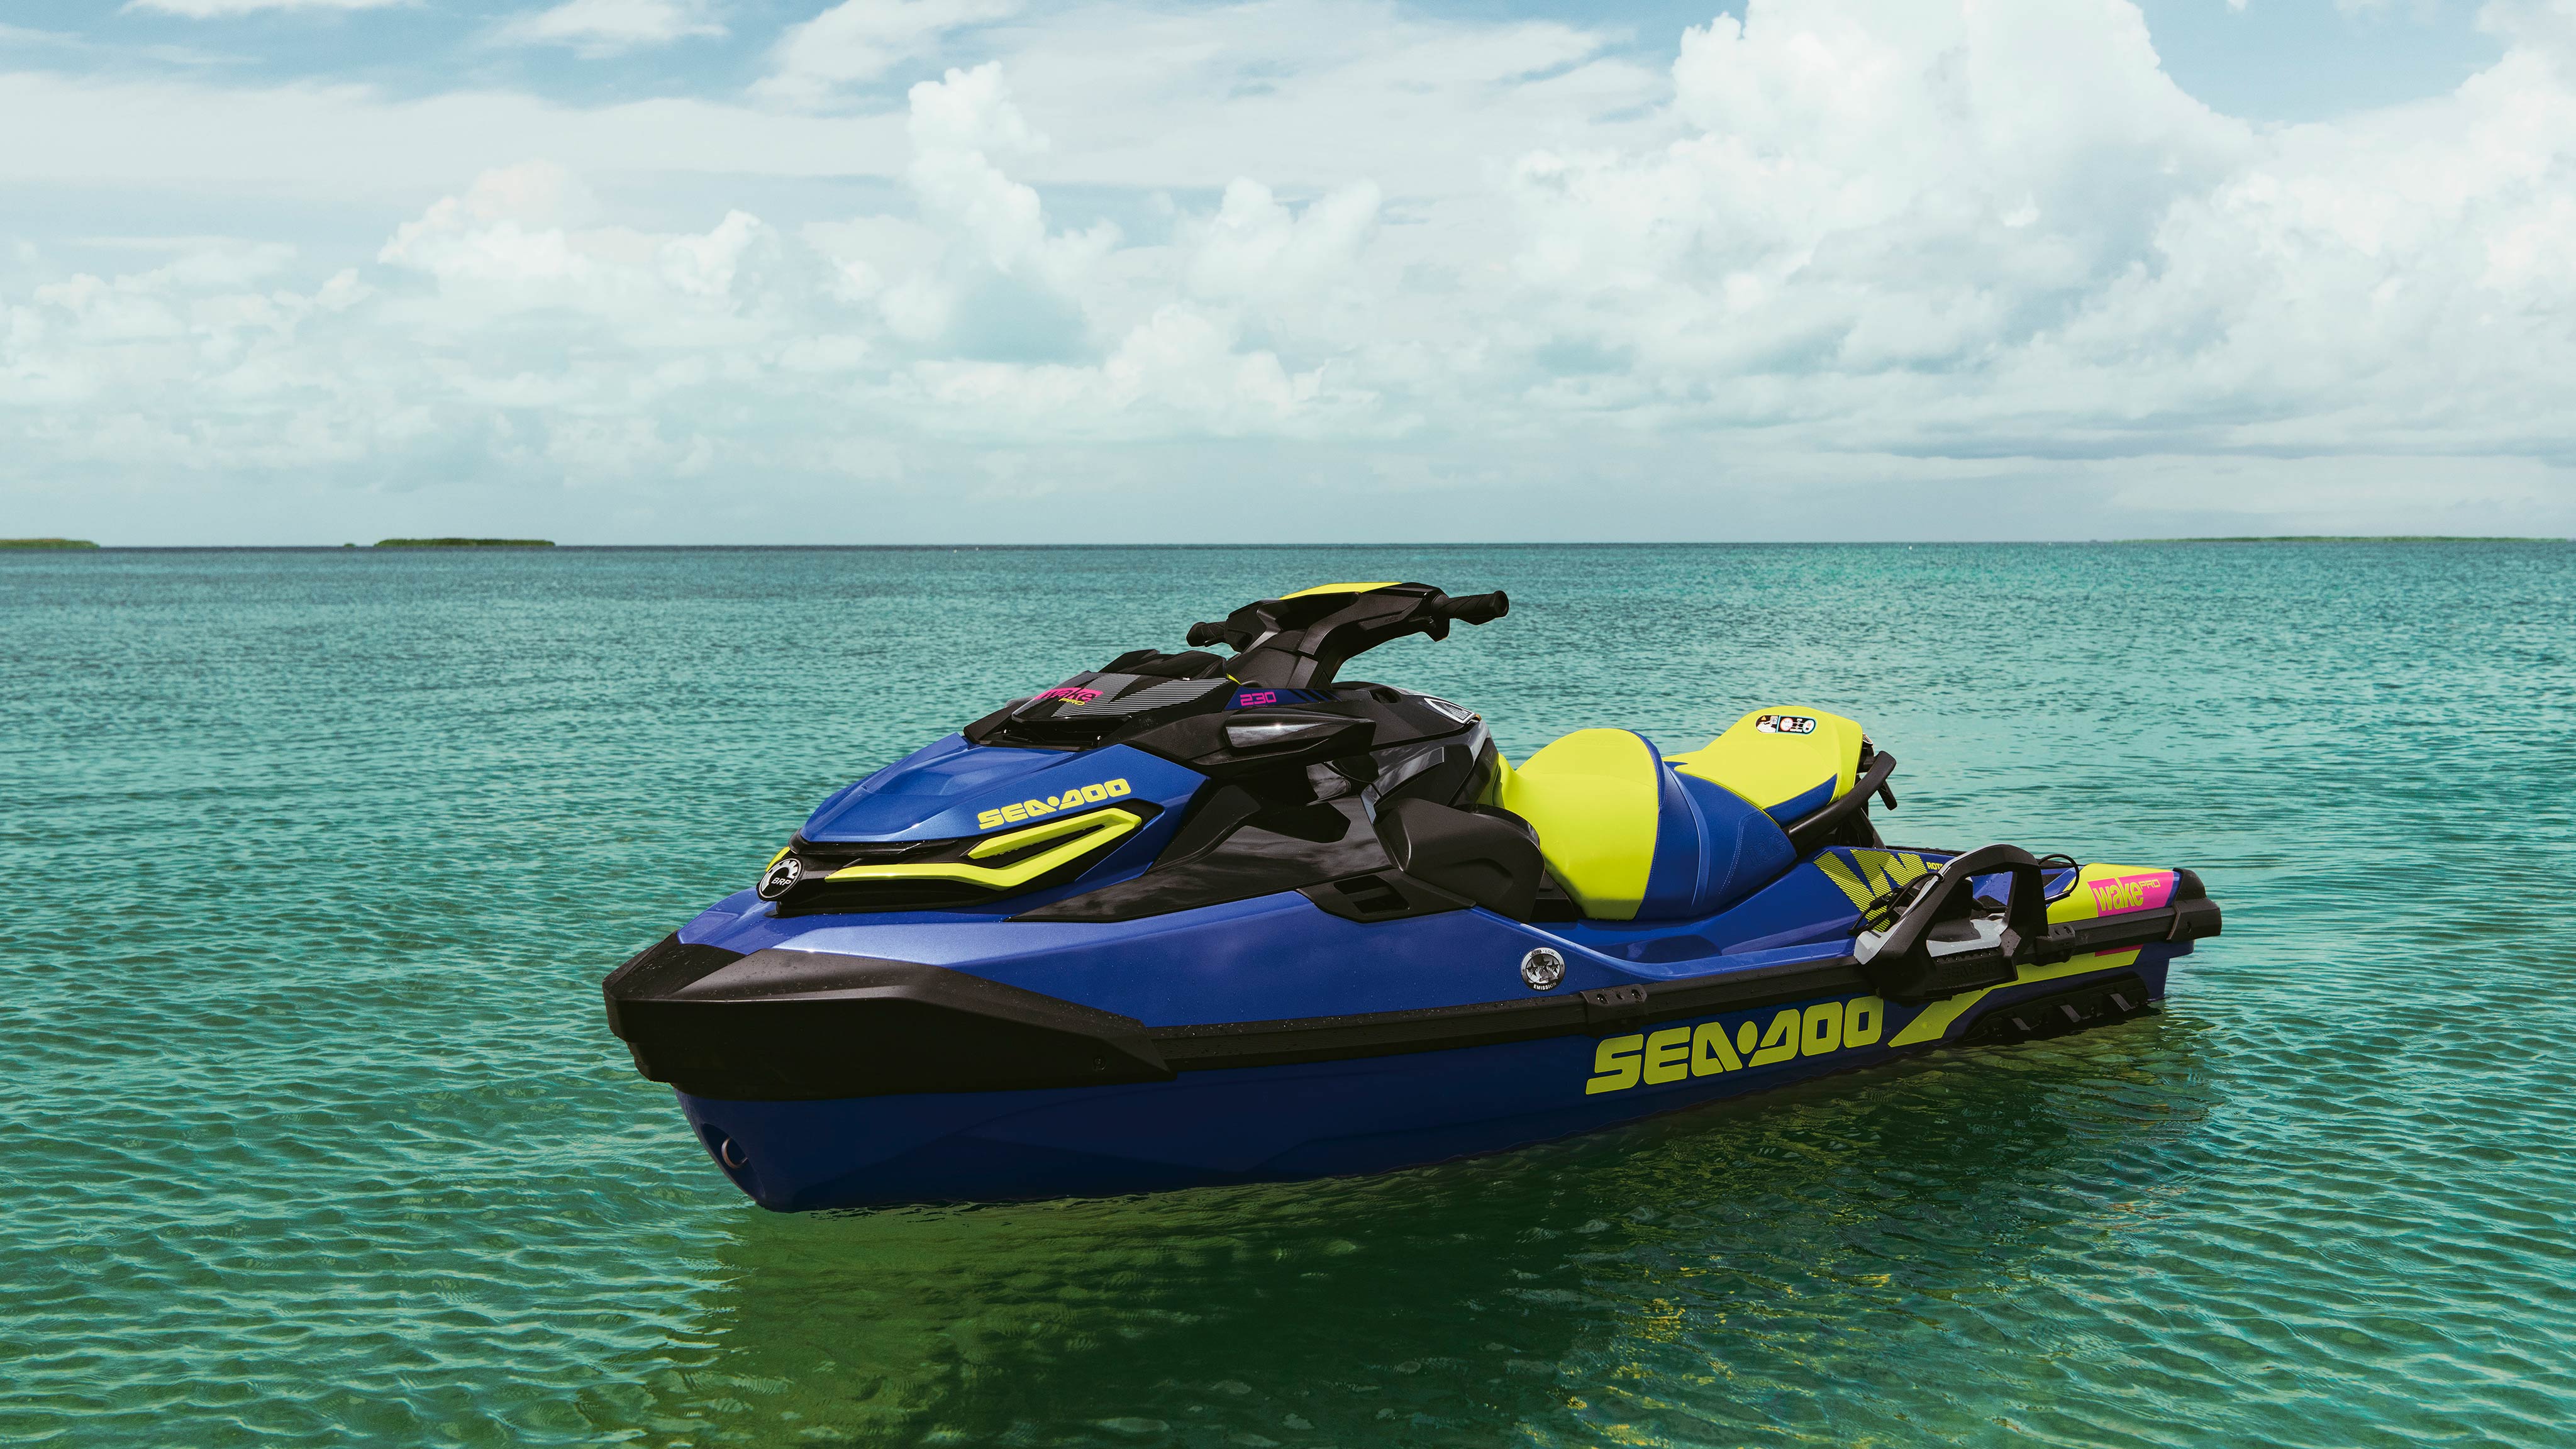 Beauty shot of a Sea-Doo Wake Pro parked in the water